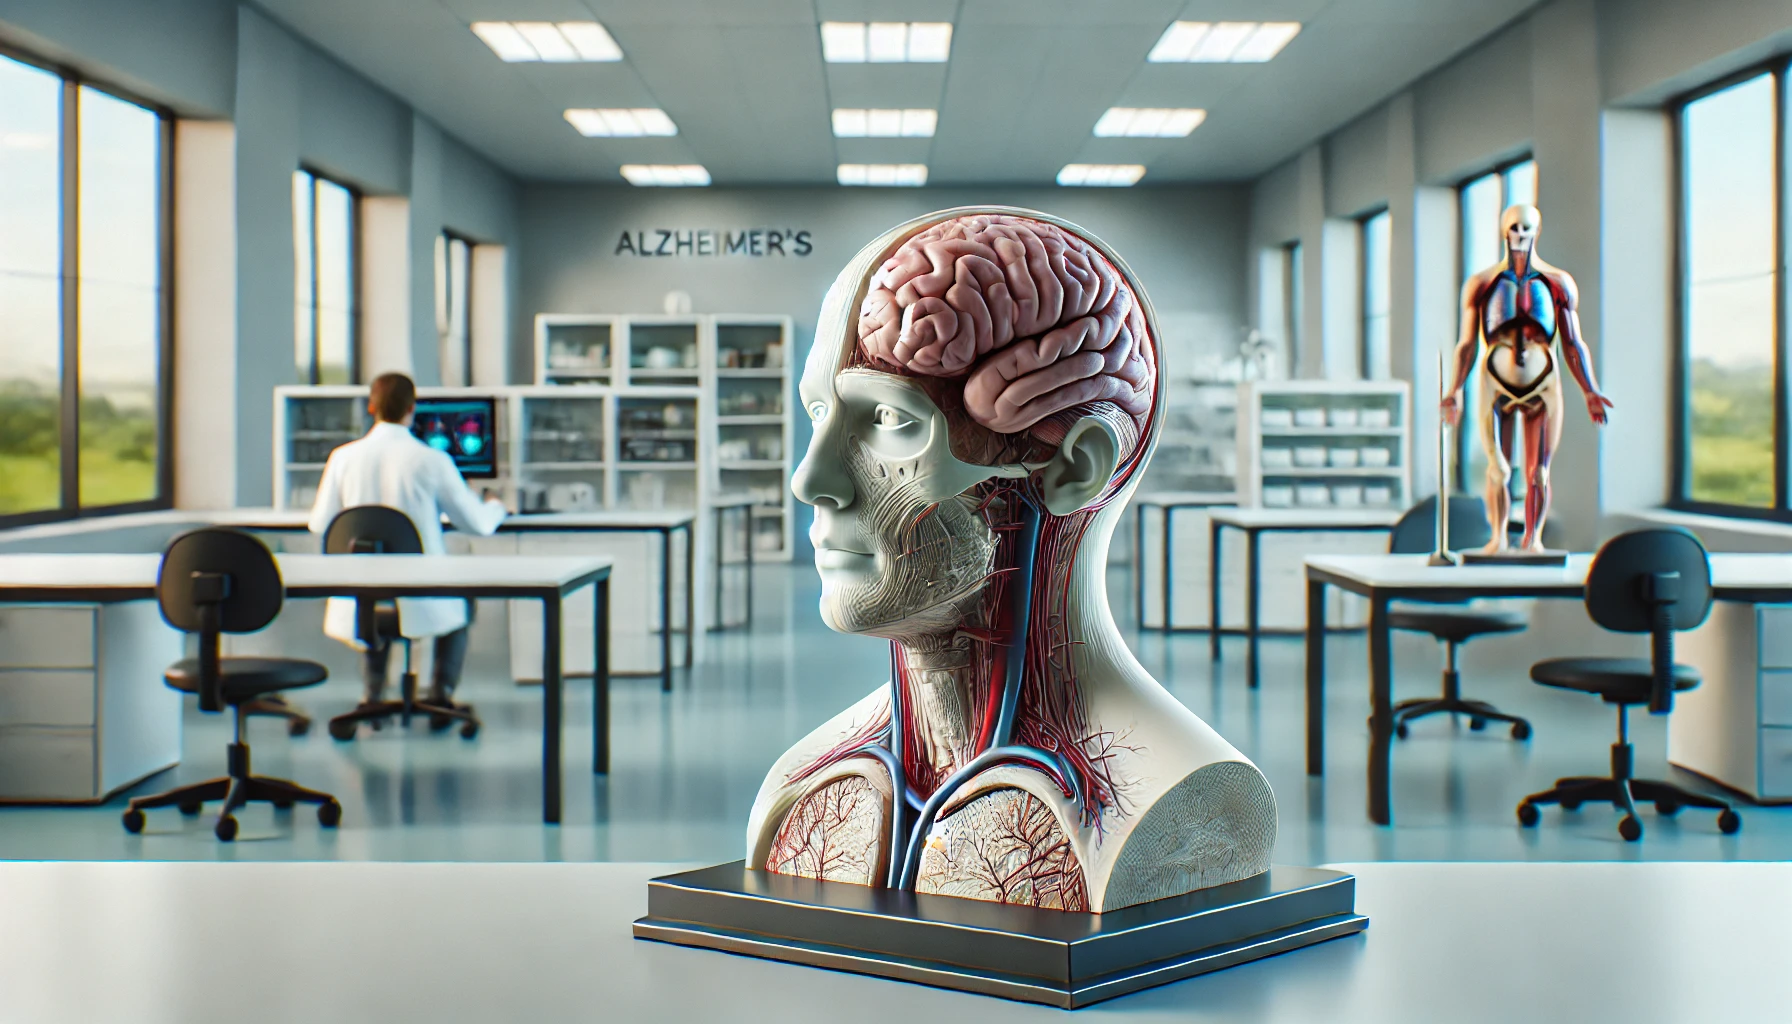 Human head anatomical model showing brain structures in a modern lab setting